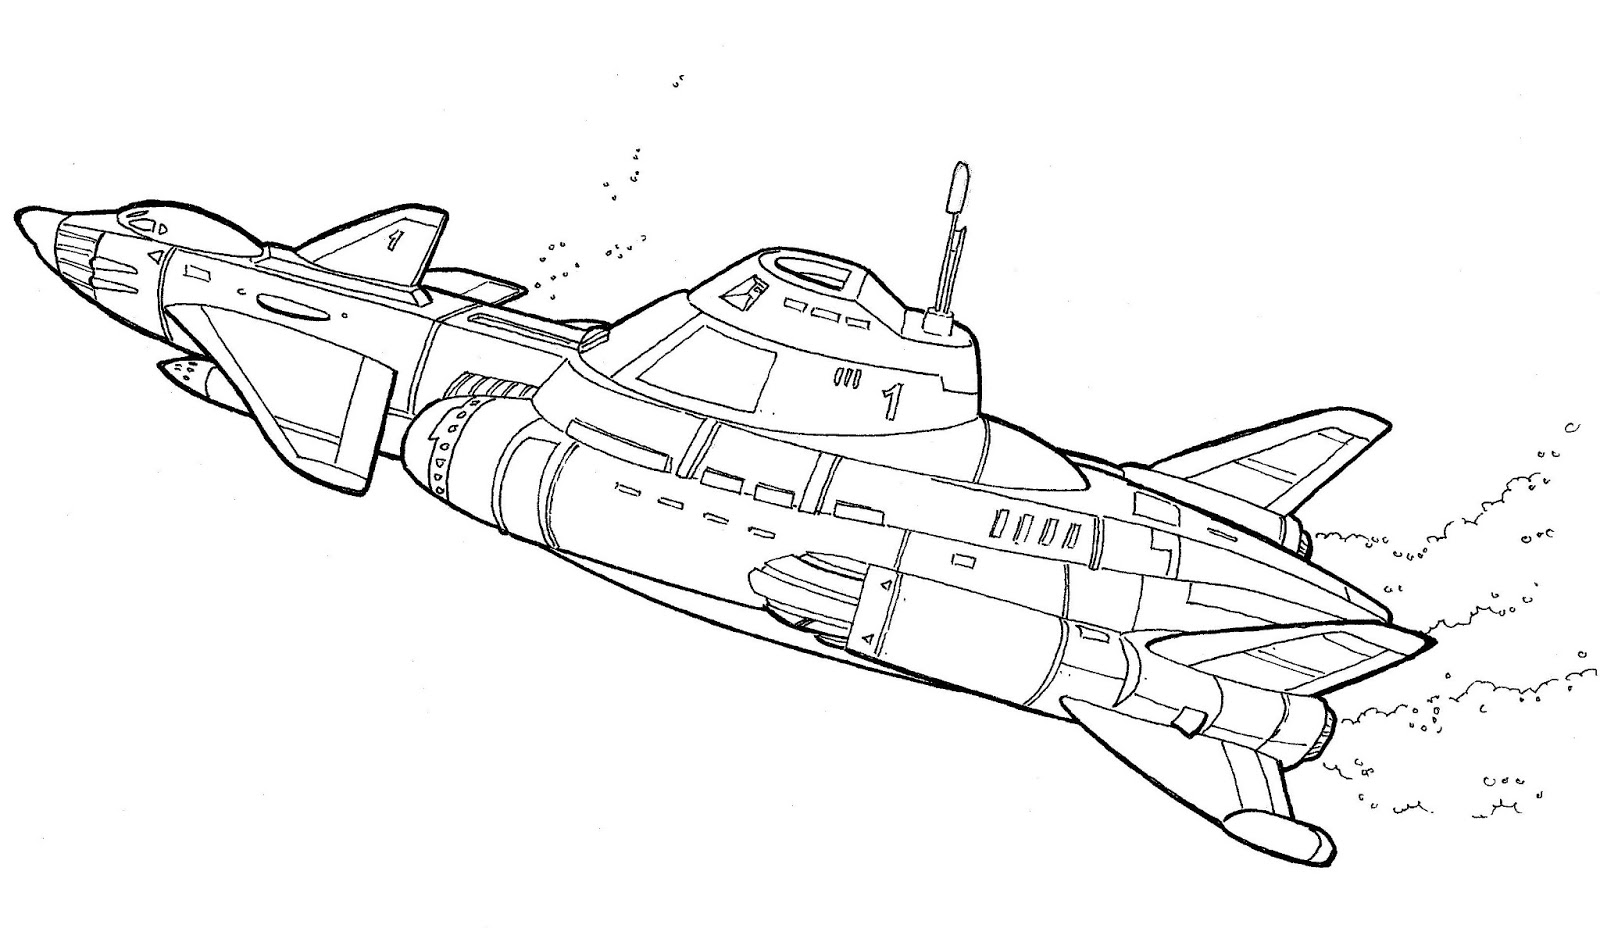 Coloring pages Submarine (Transportation) – Printable Coloring Pages